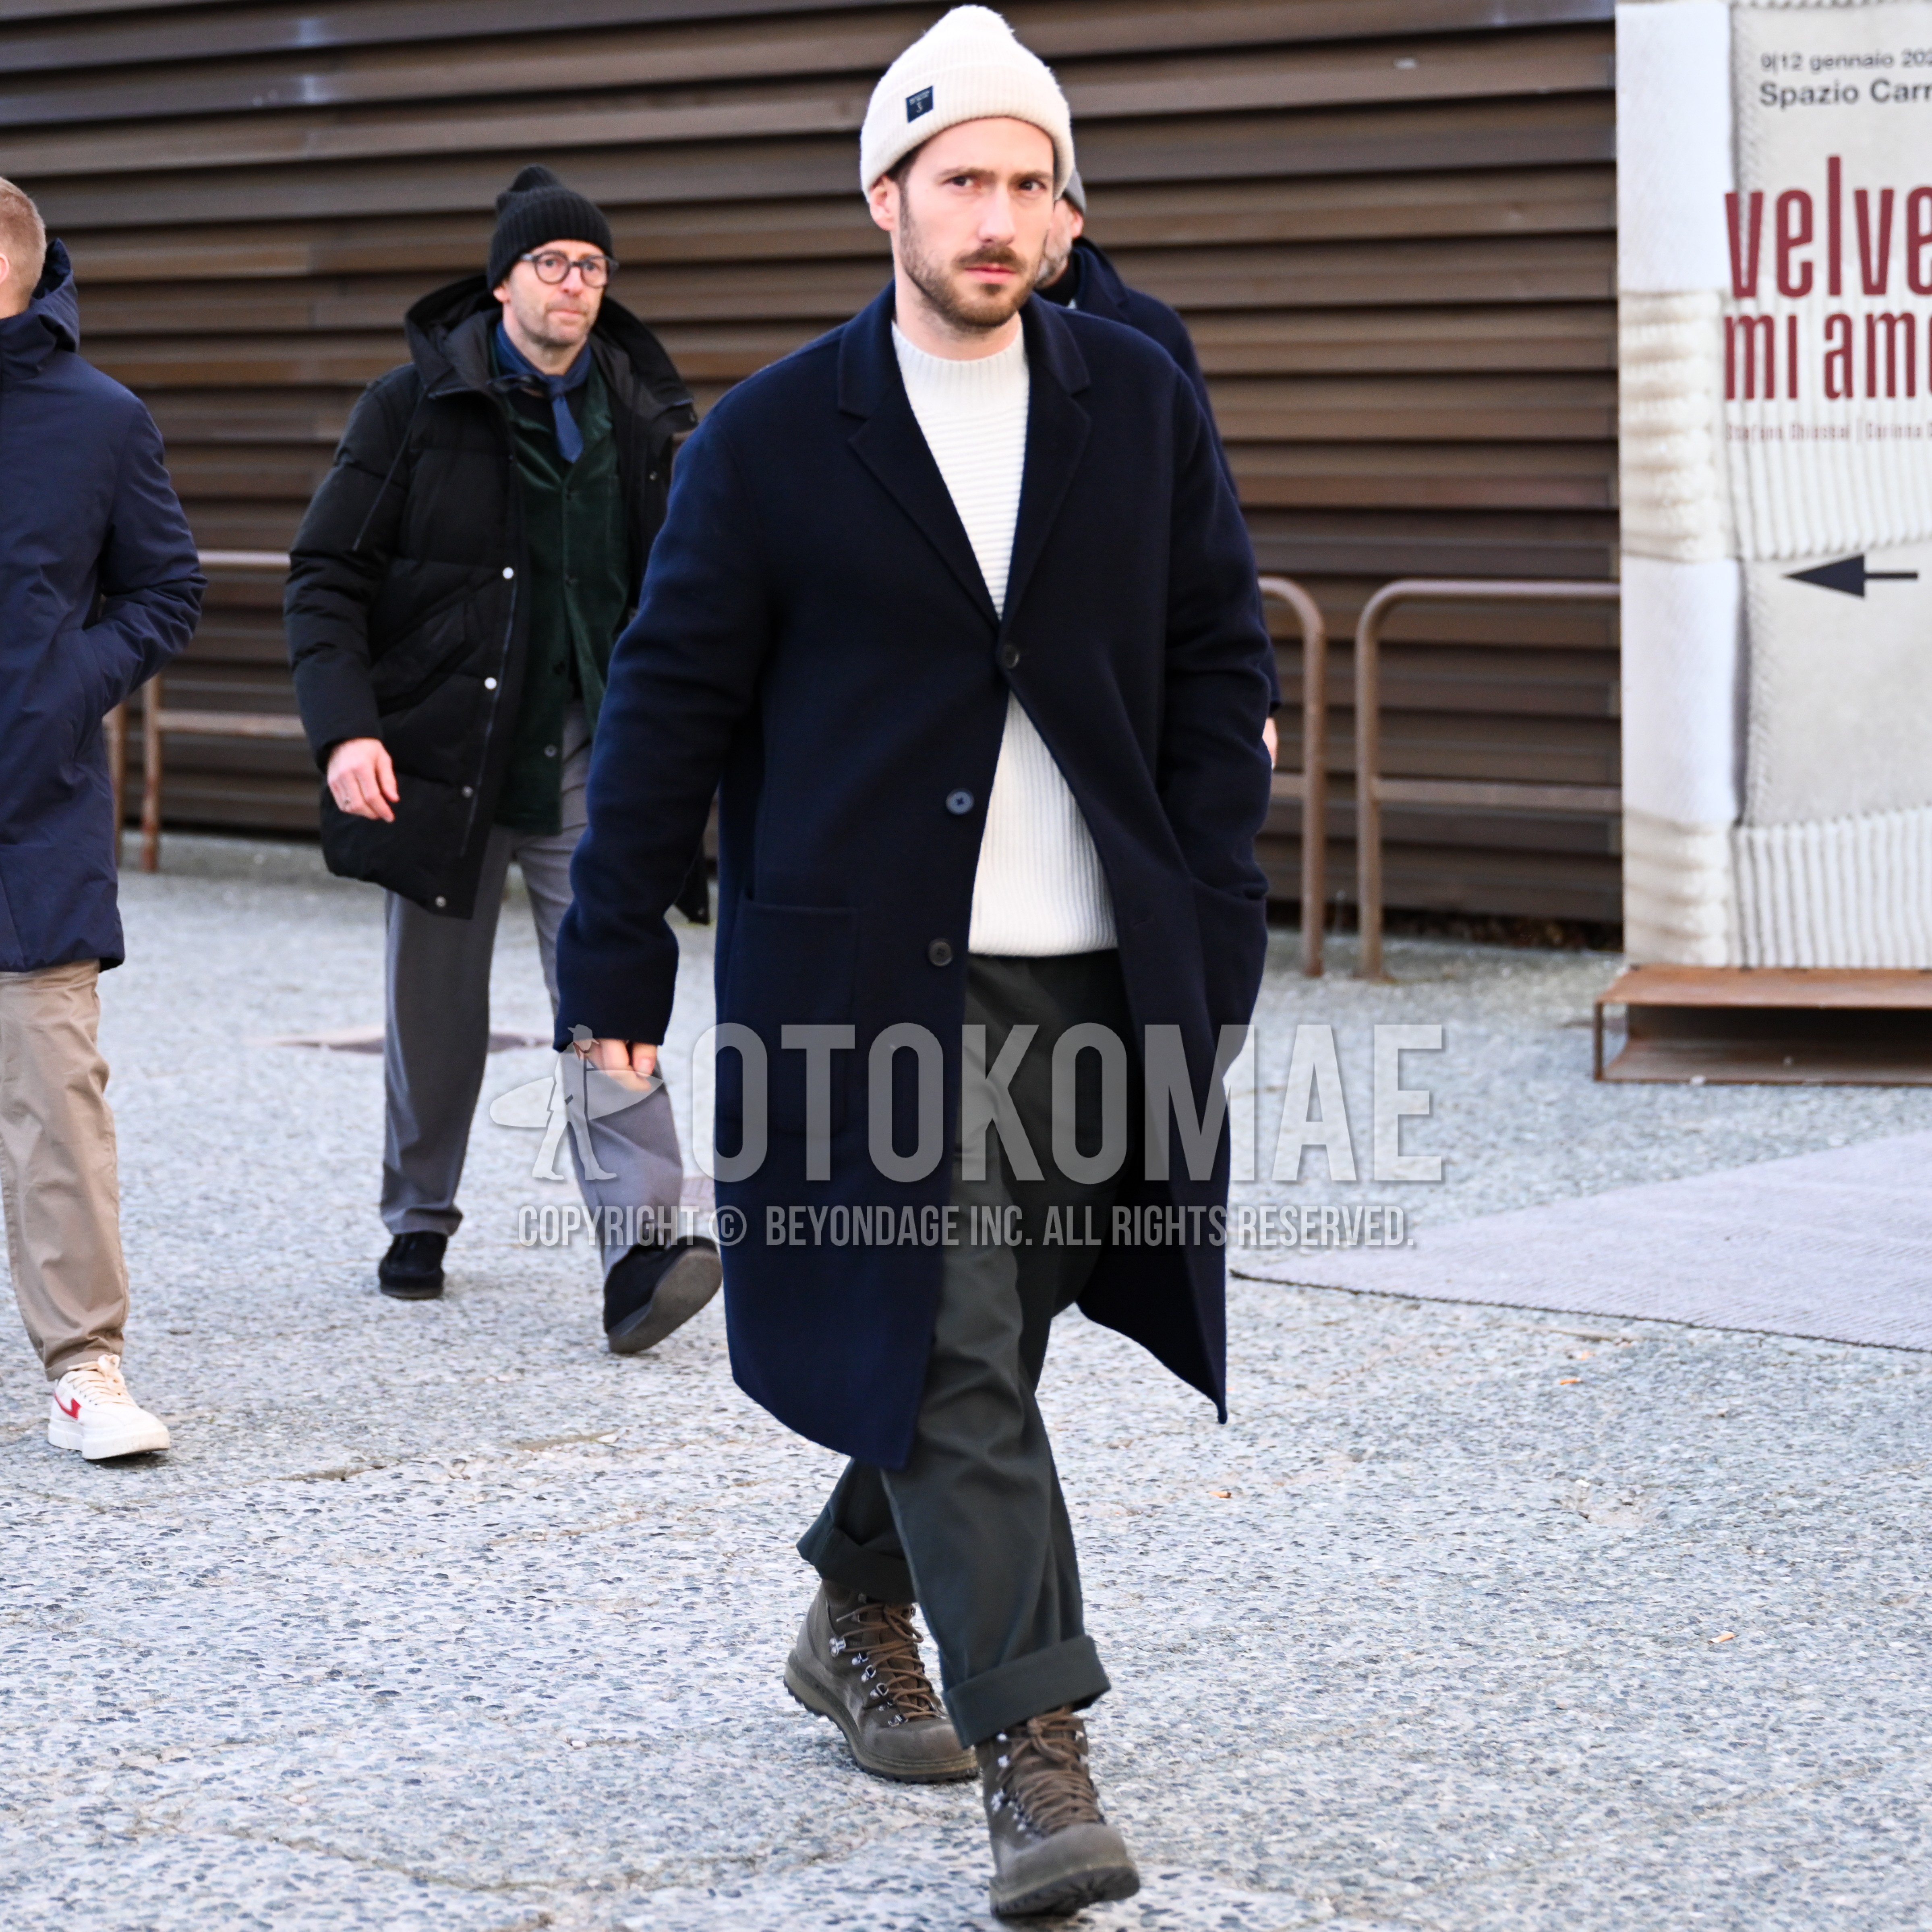 Men's spring autumn winter outfit with white one point knit cap, navy plain chester coat, white plain sweater, dark gray plain wide pants, brown work boots.